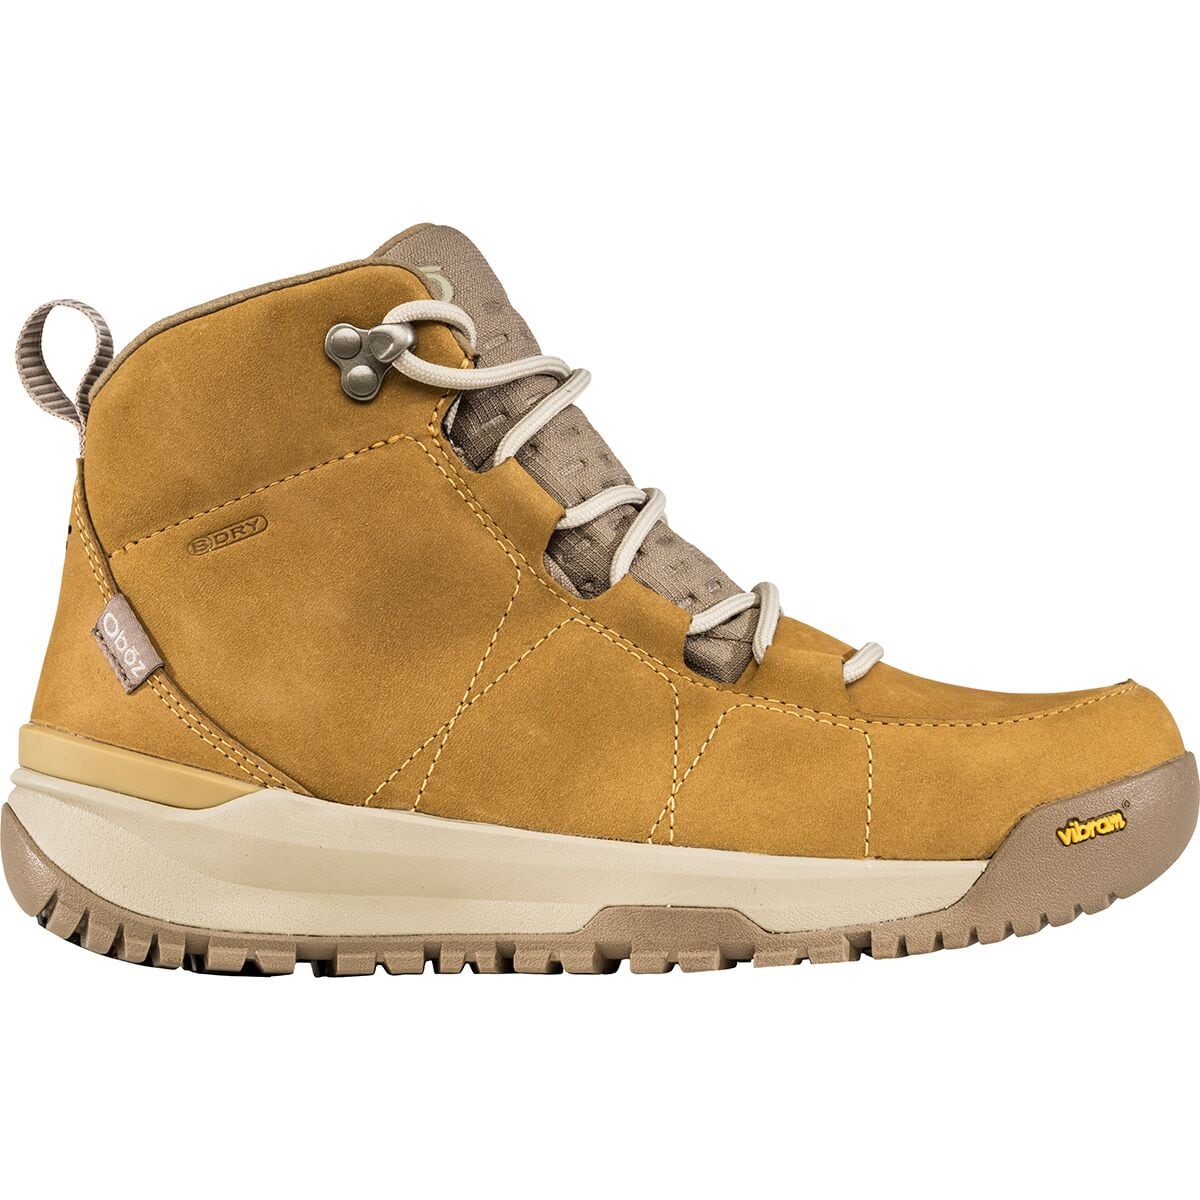 Sphinx Mid Insulated B-DRY Boot - Women